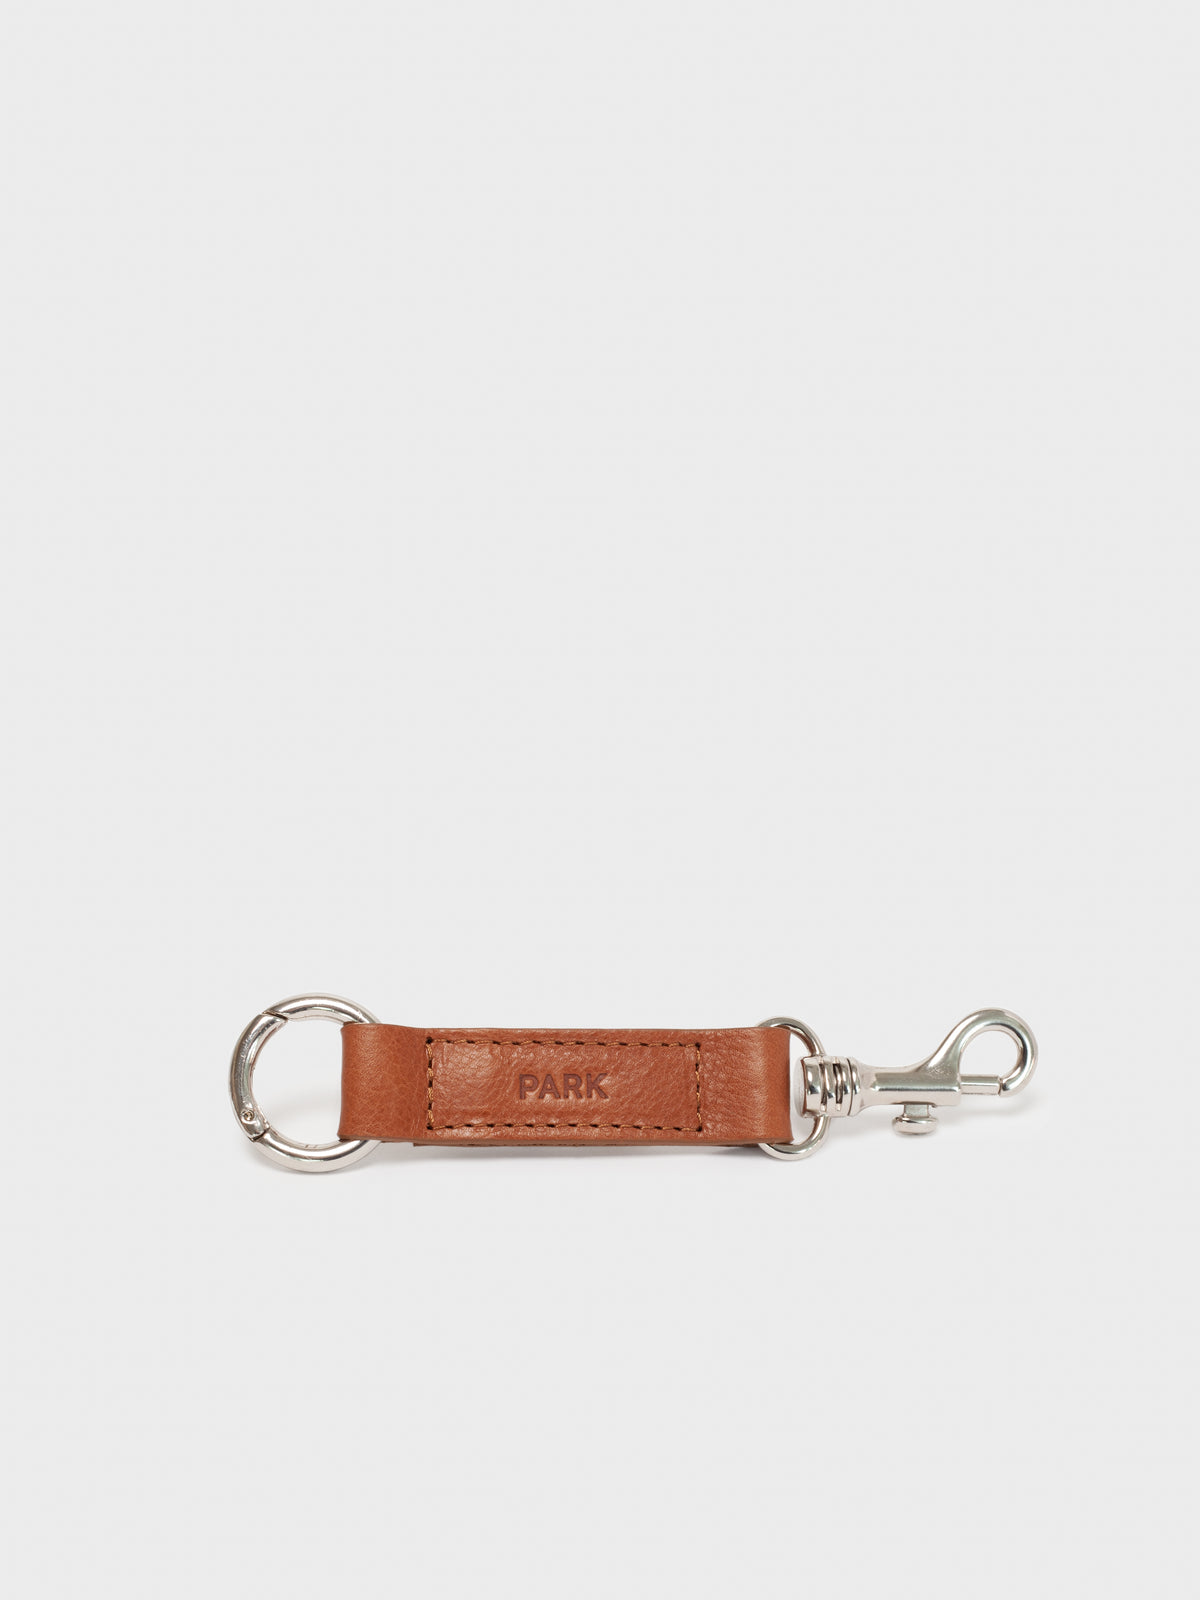 Keychain I by Park Bags brown